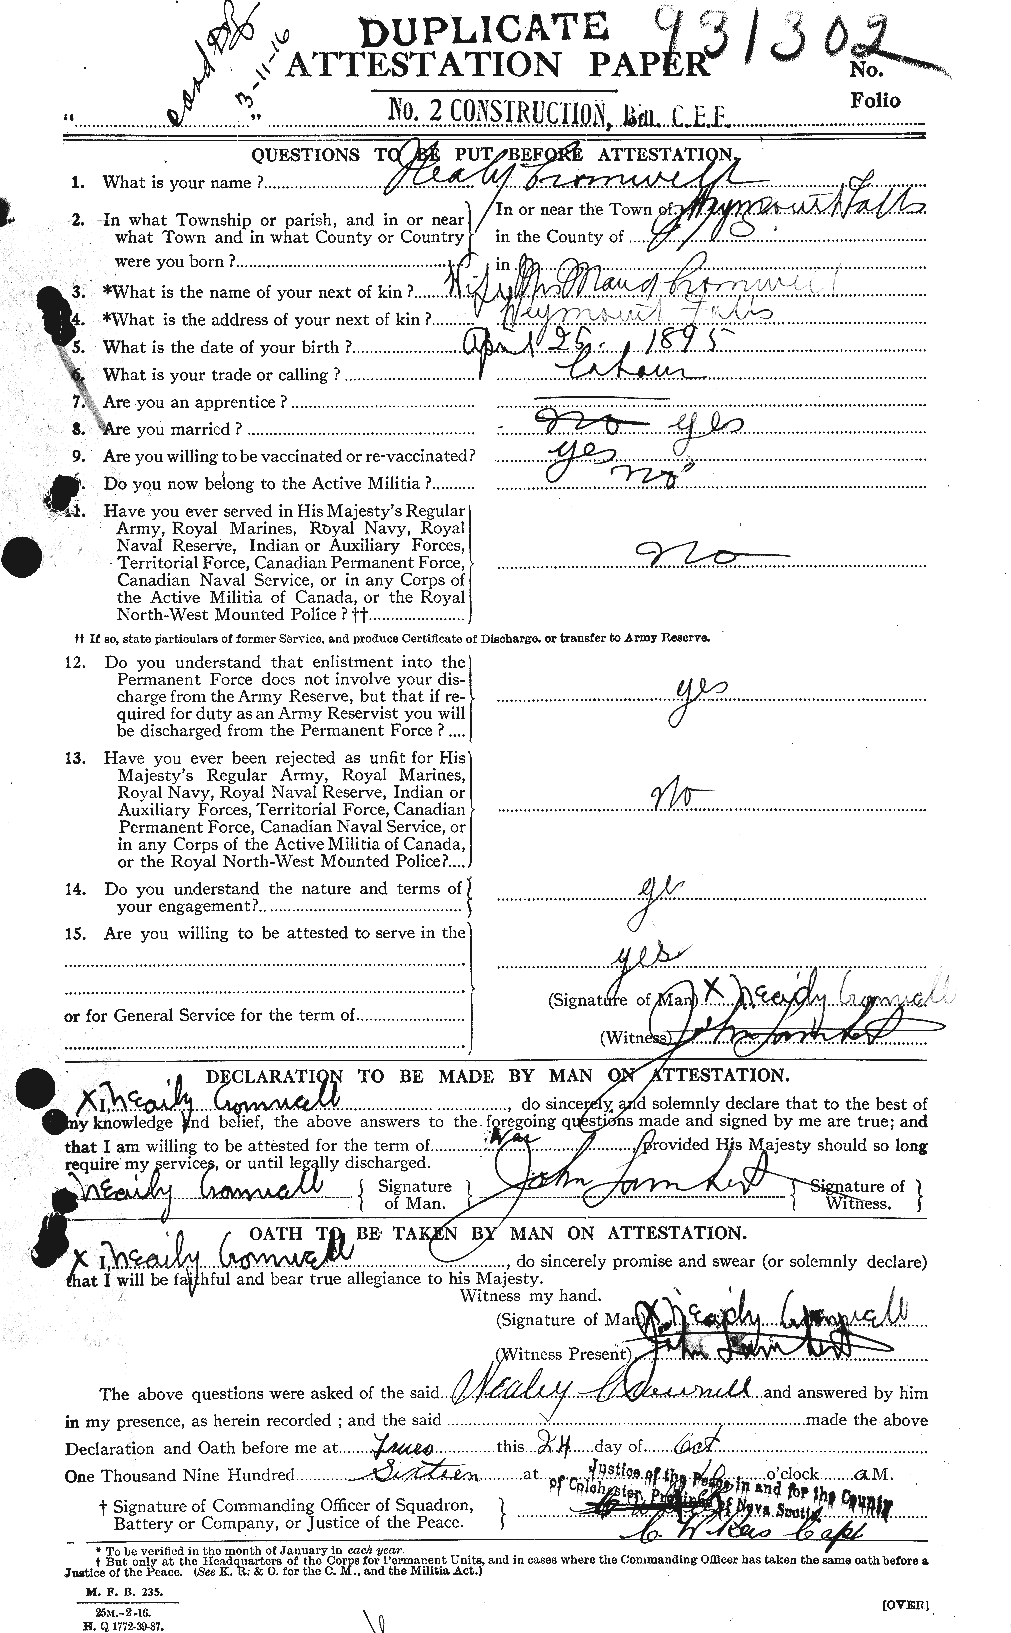 Personnel Records of the First World War - CEF 064912a